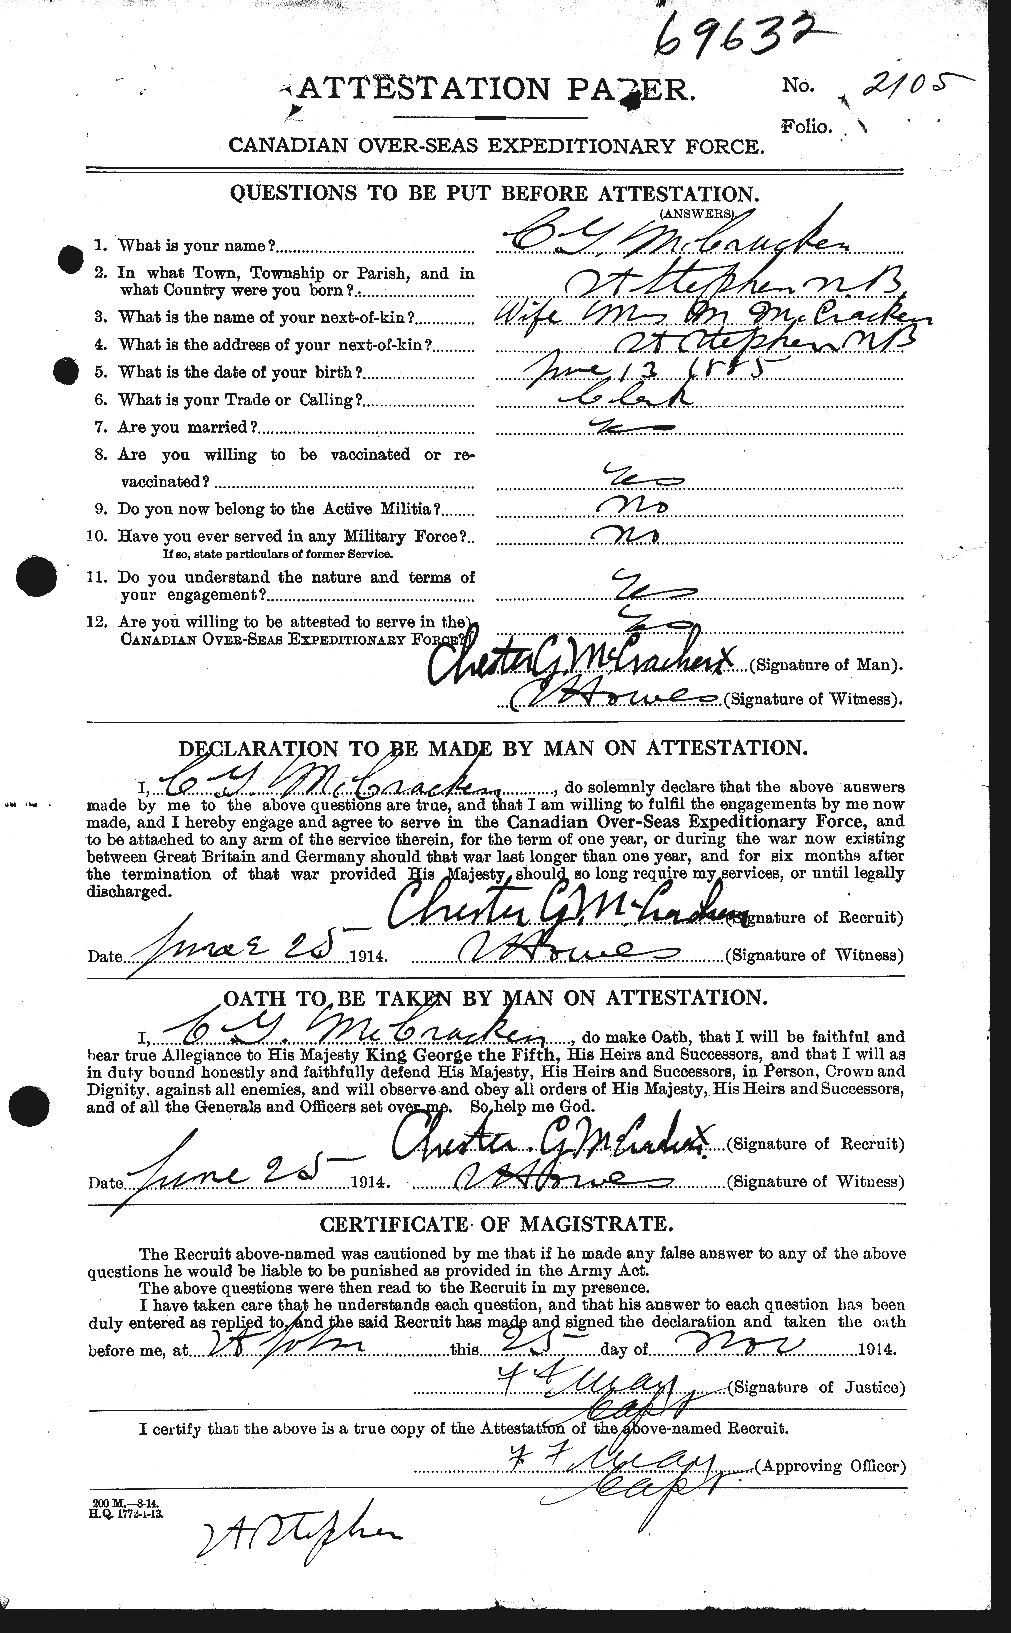 Personnel Records of the First World War - CEF 134612a